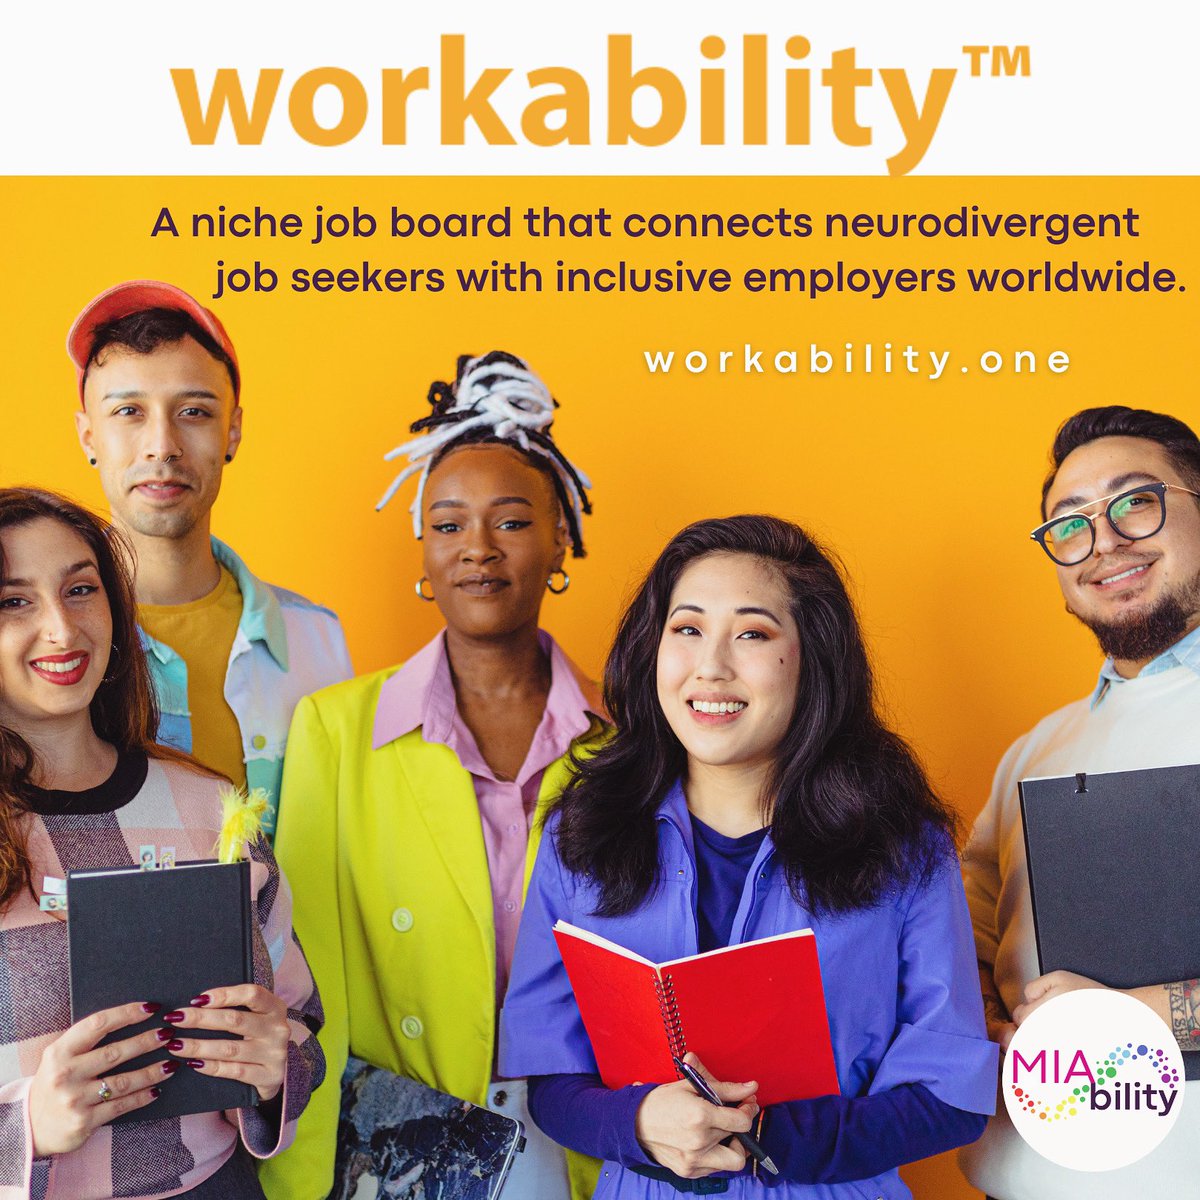 Workability is a niche job board for neurodivergent job seekers with thousands of active opportunities and resources 🌱📈 workability.one 

#MIAbility #neurodiversity #InclusionMatters